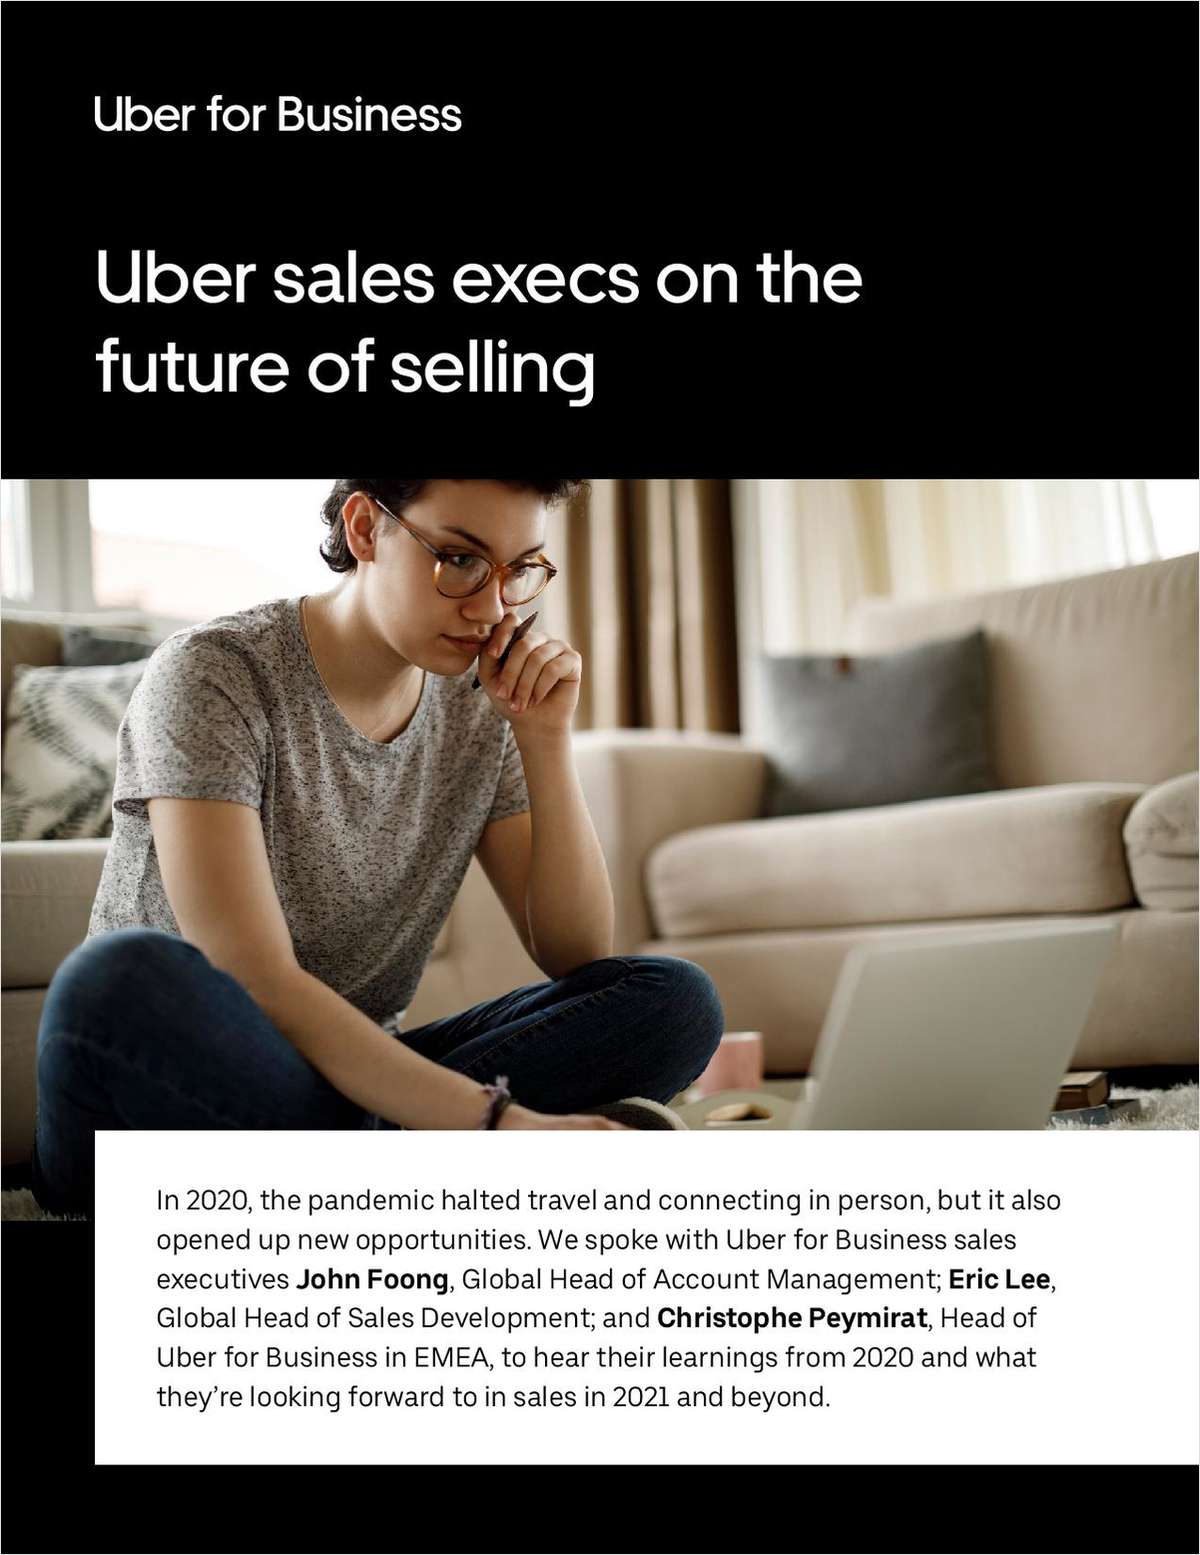 Uber sales execs on the future of selling